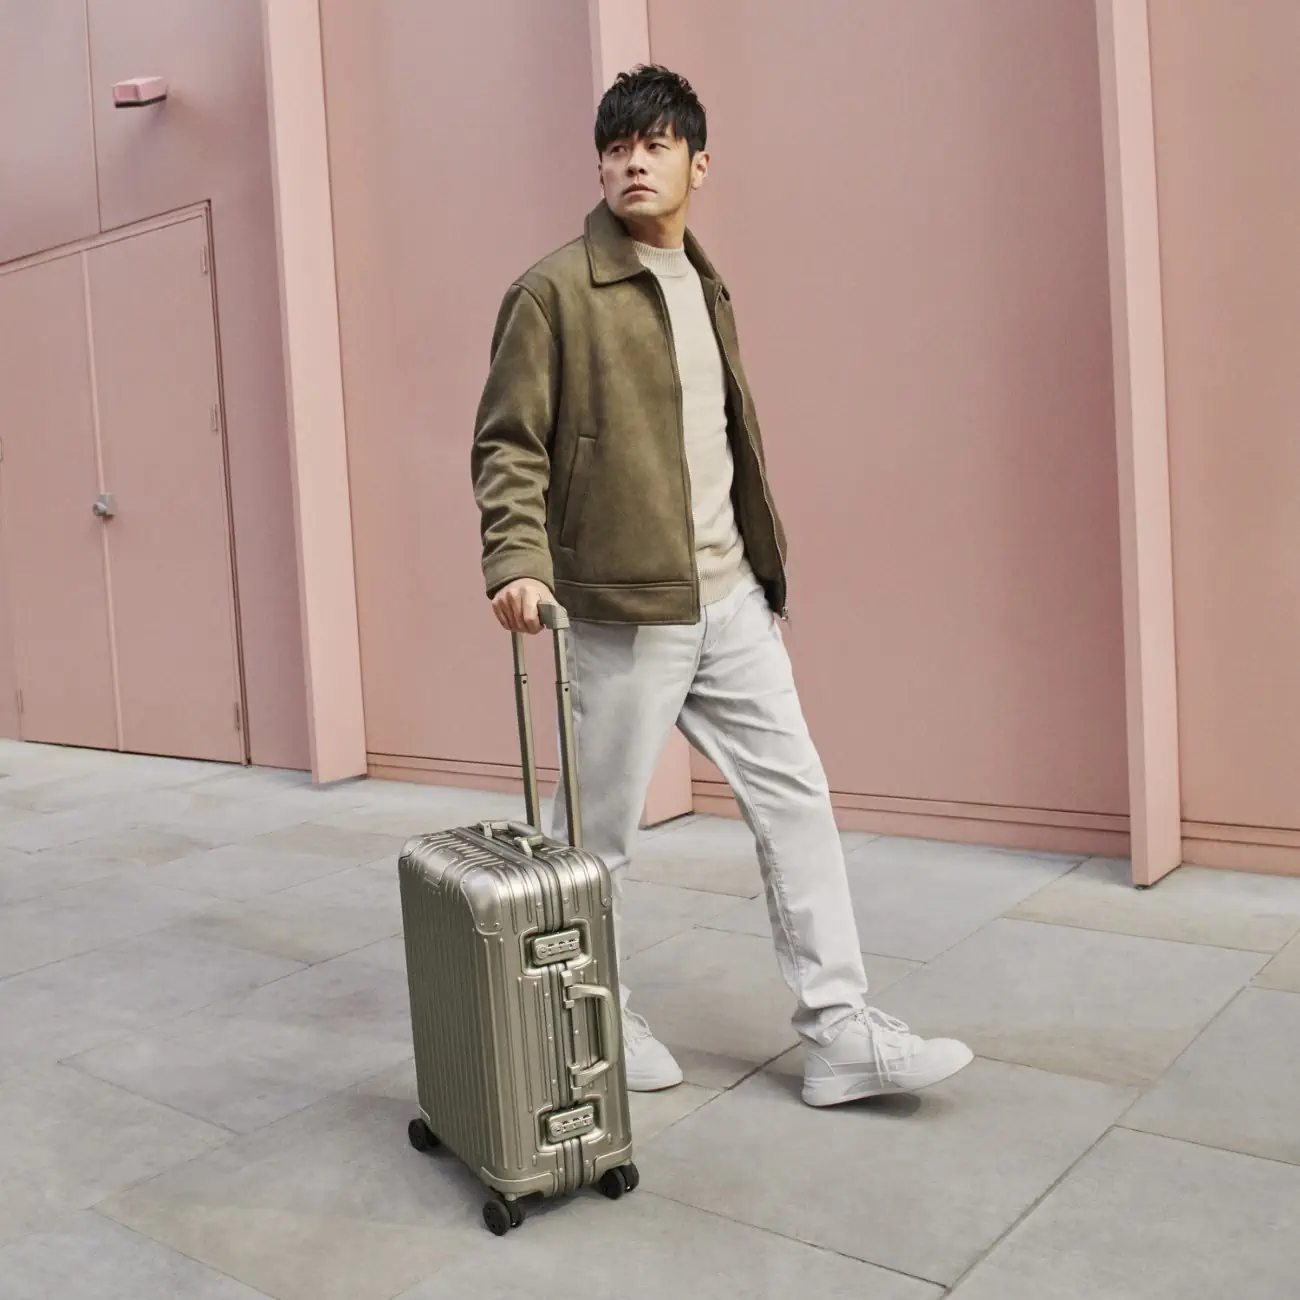 Jay Chou takes to the streets of London in Rimowa's latest ''Never Still'' campaign